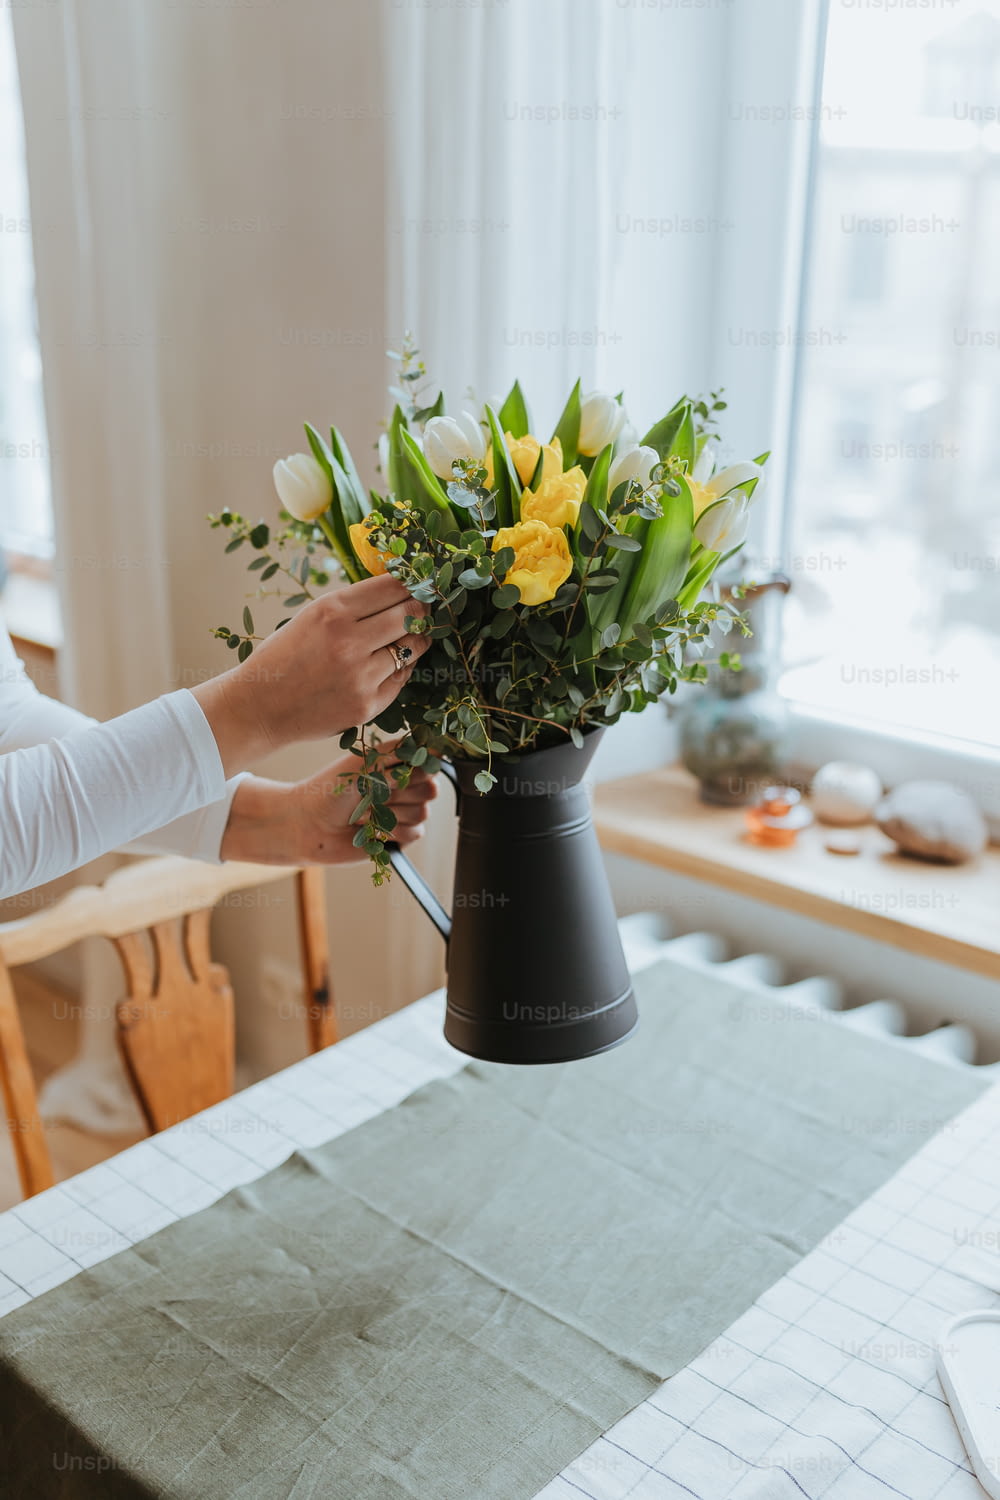 a person holding a vase with flowers on a table